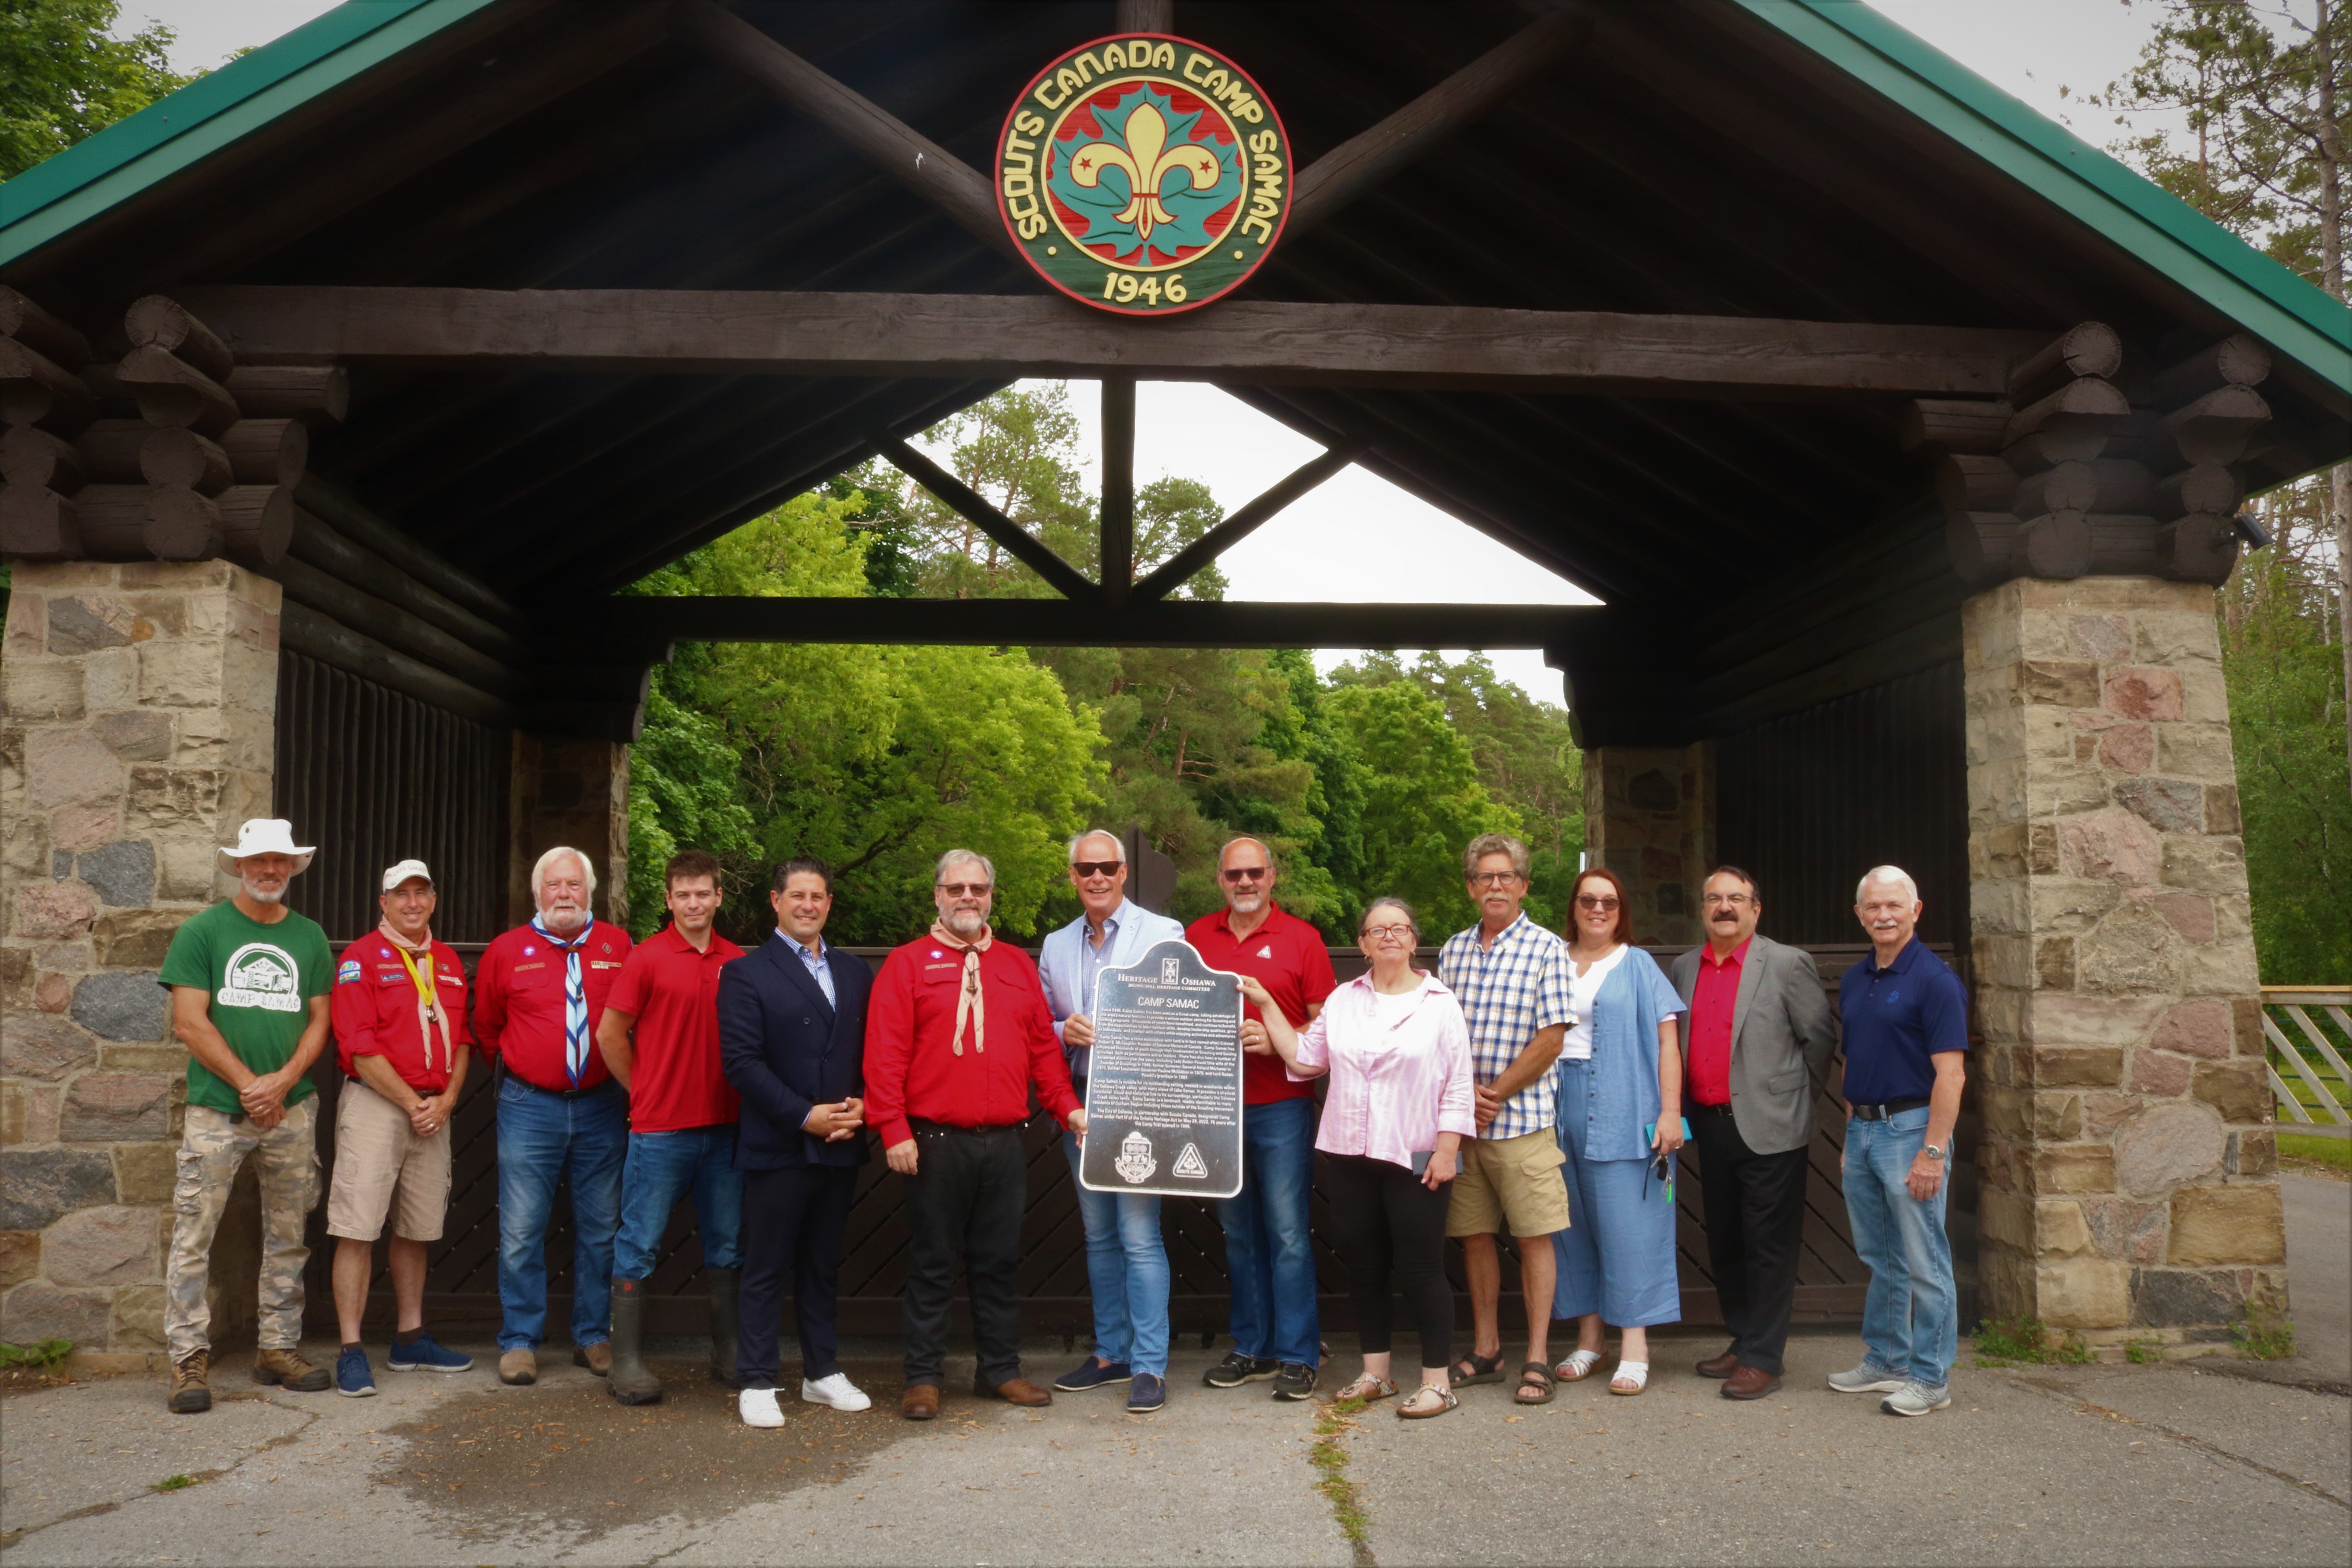 Representatives from Scouts Canada joined members of City Council and Heritage Oshawa to celebrate a heritage plaque that illustrates the designation of Camp Samac as a property of cultural heritage value or interest under the Ontario Heritage Act.